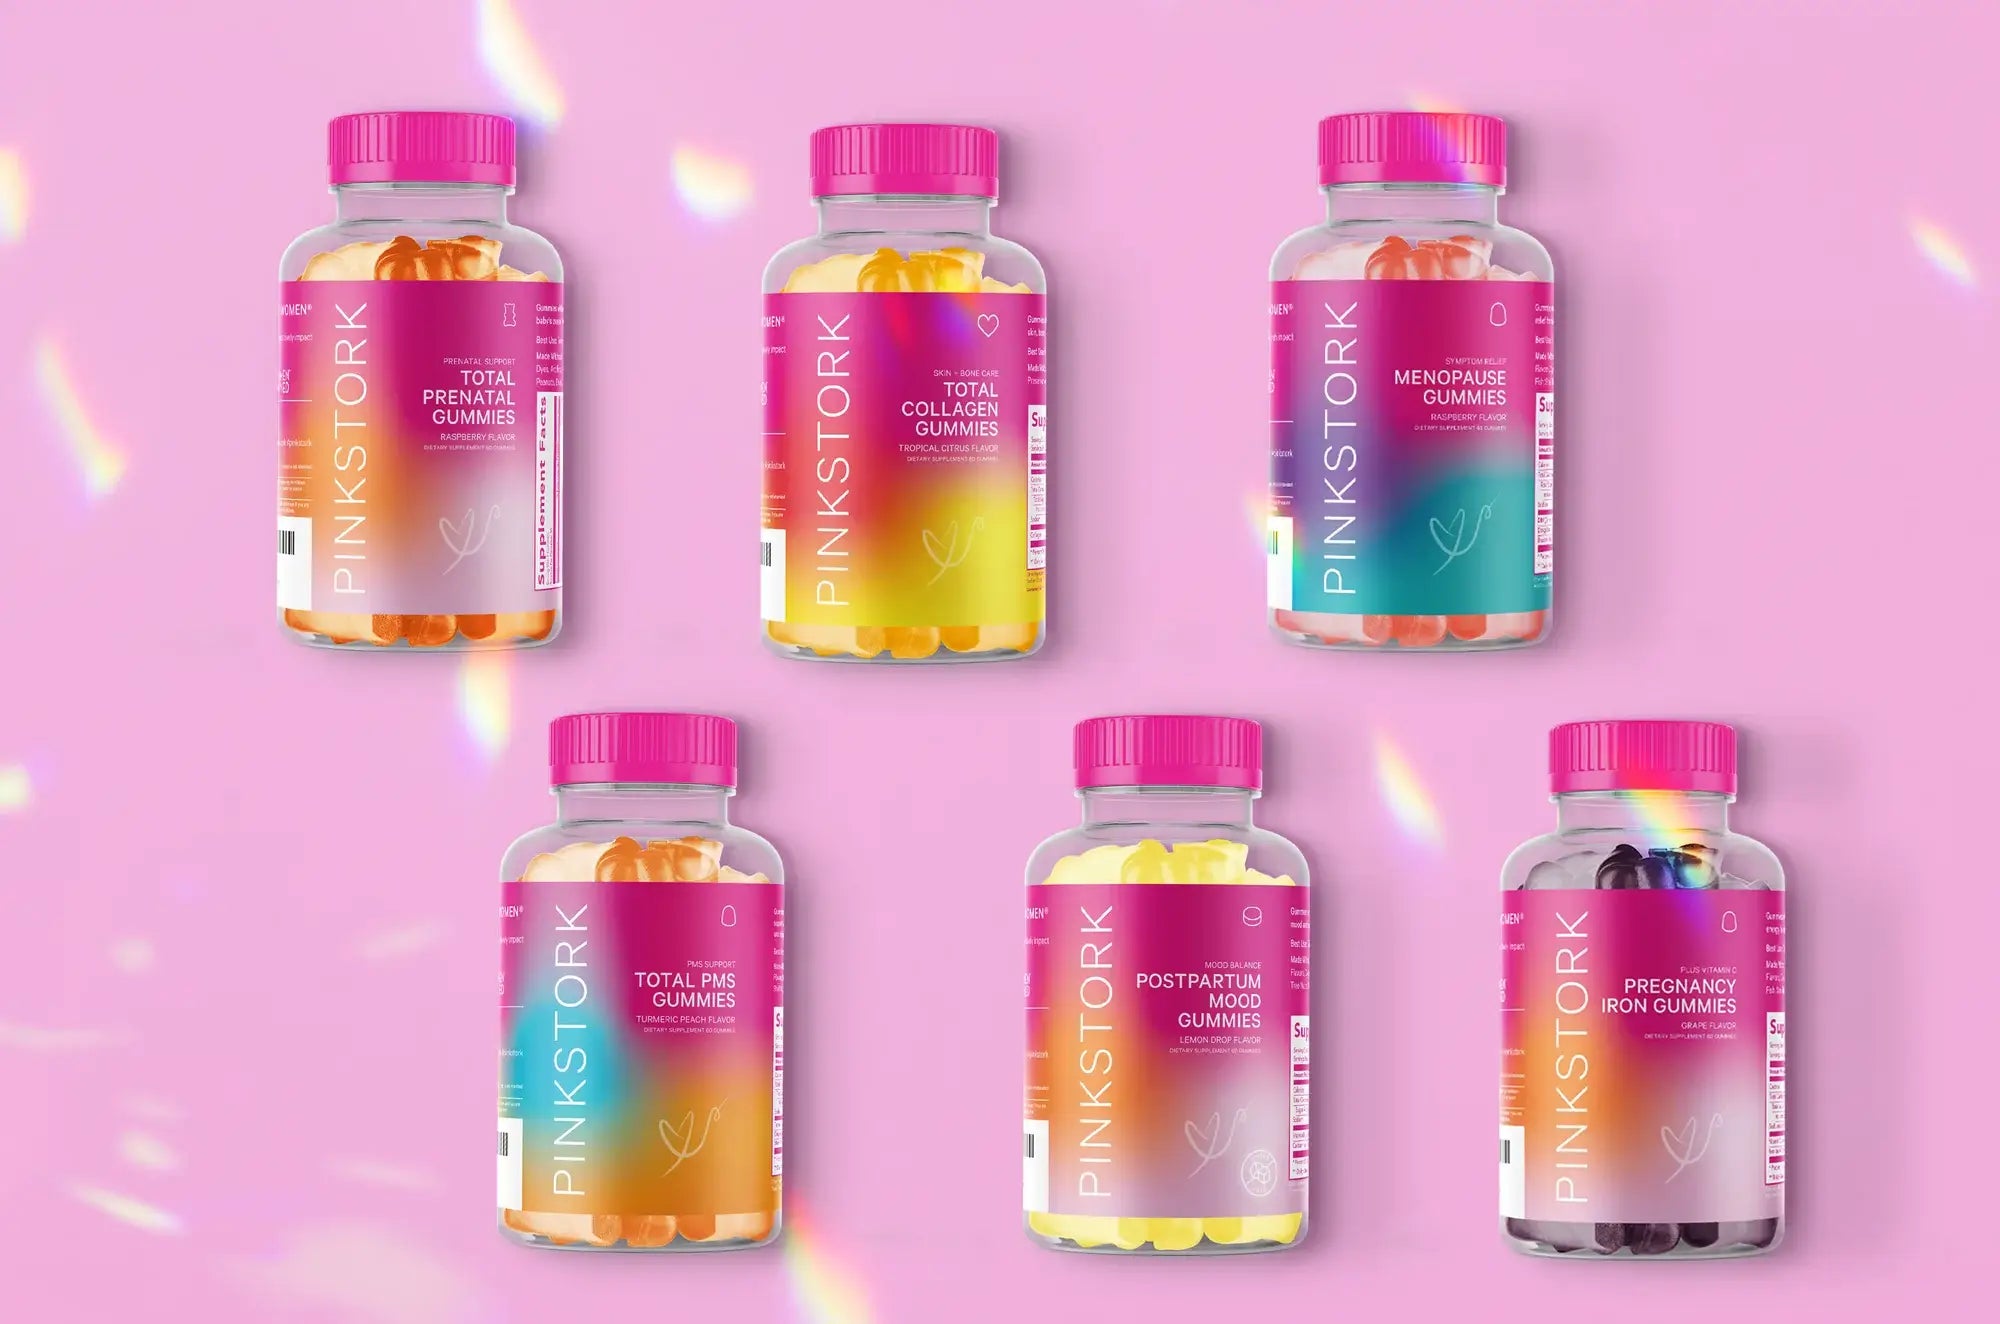 NEW Gummies to Make Your Life Sweeter